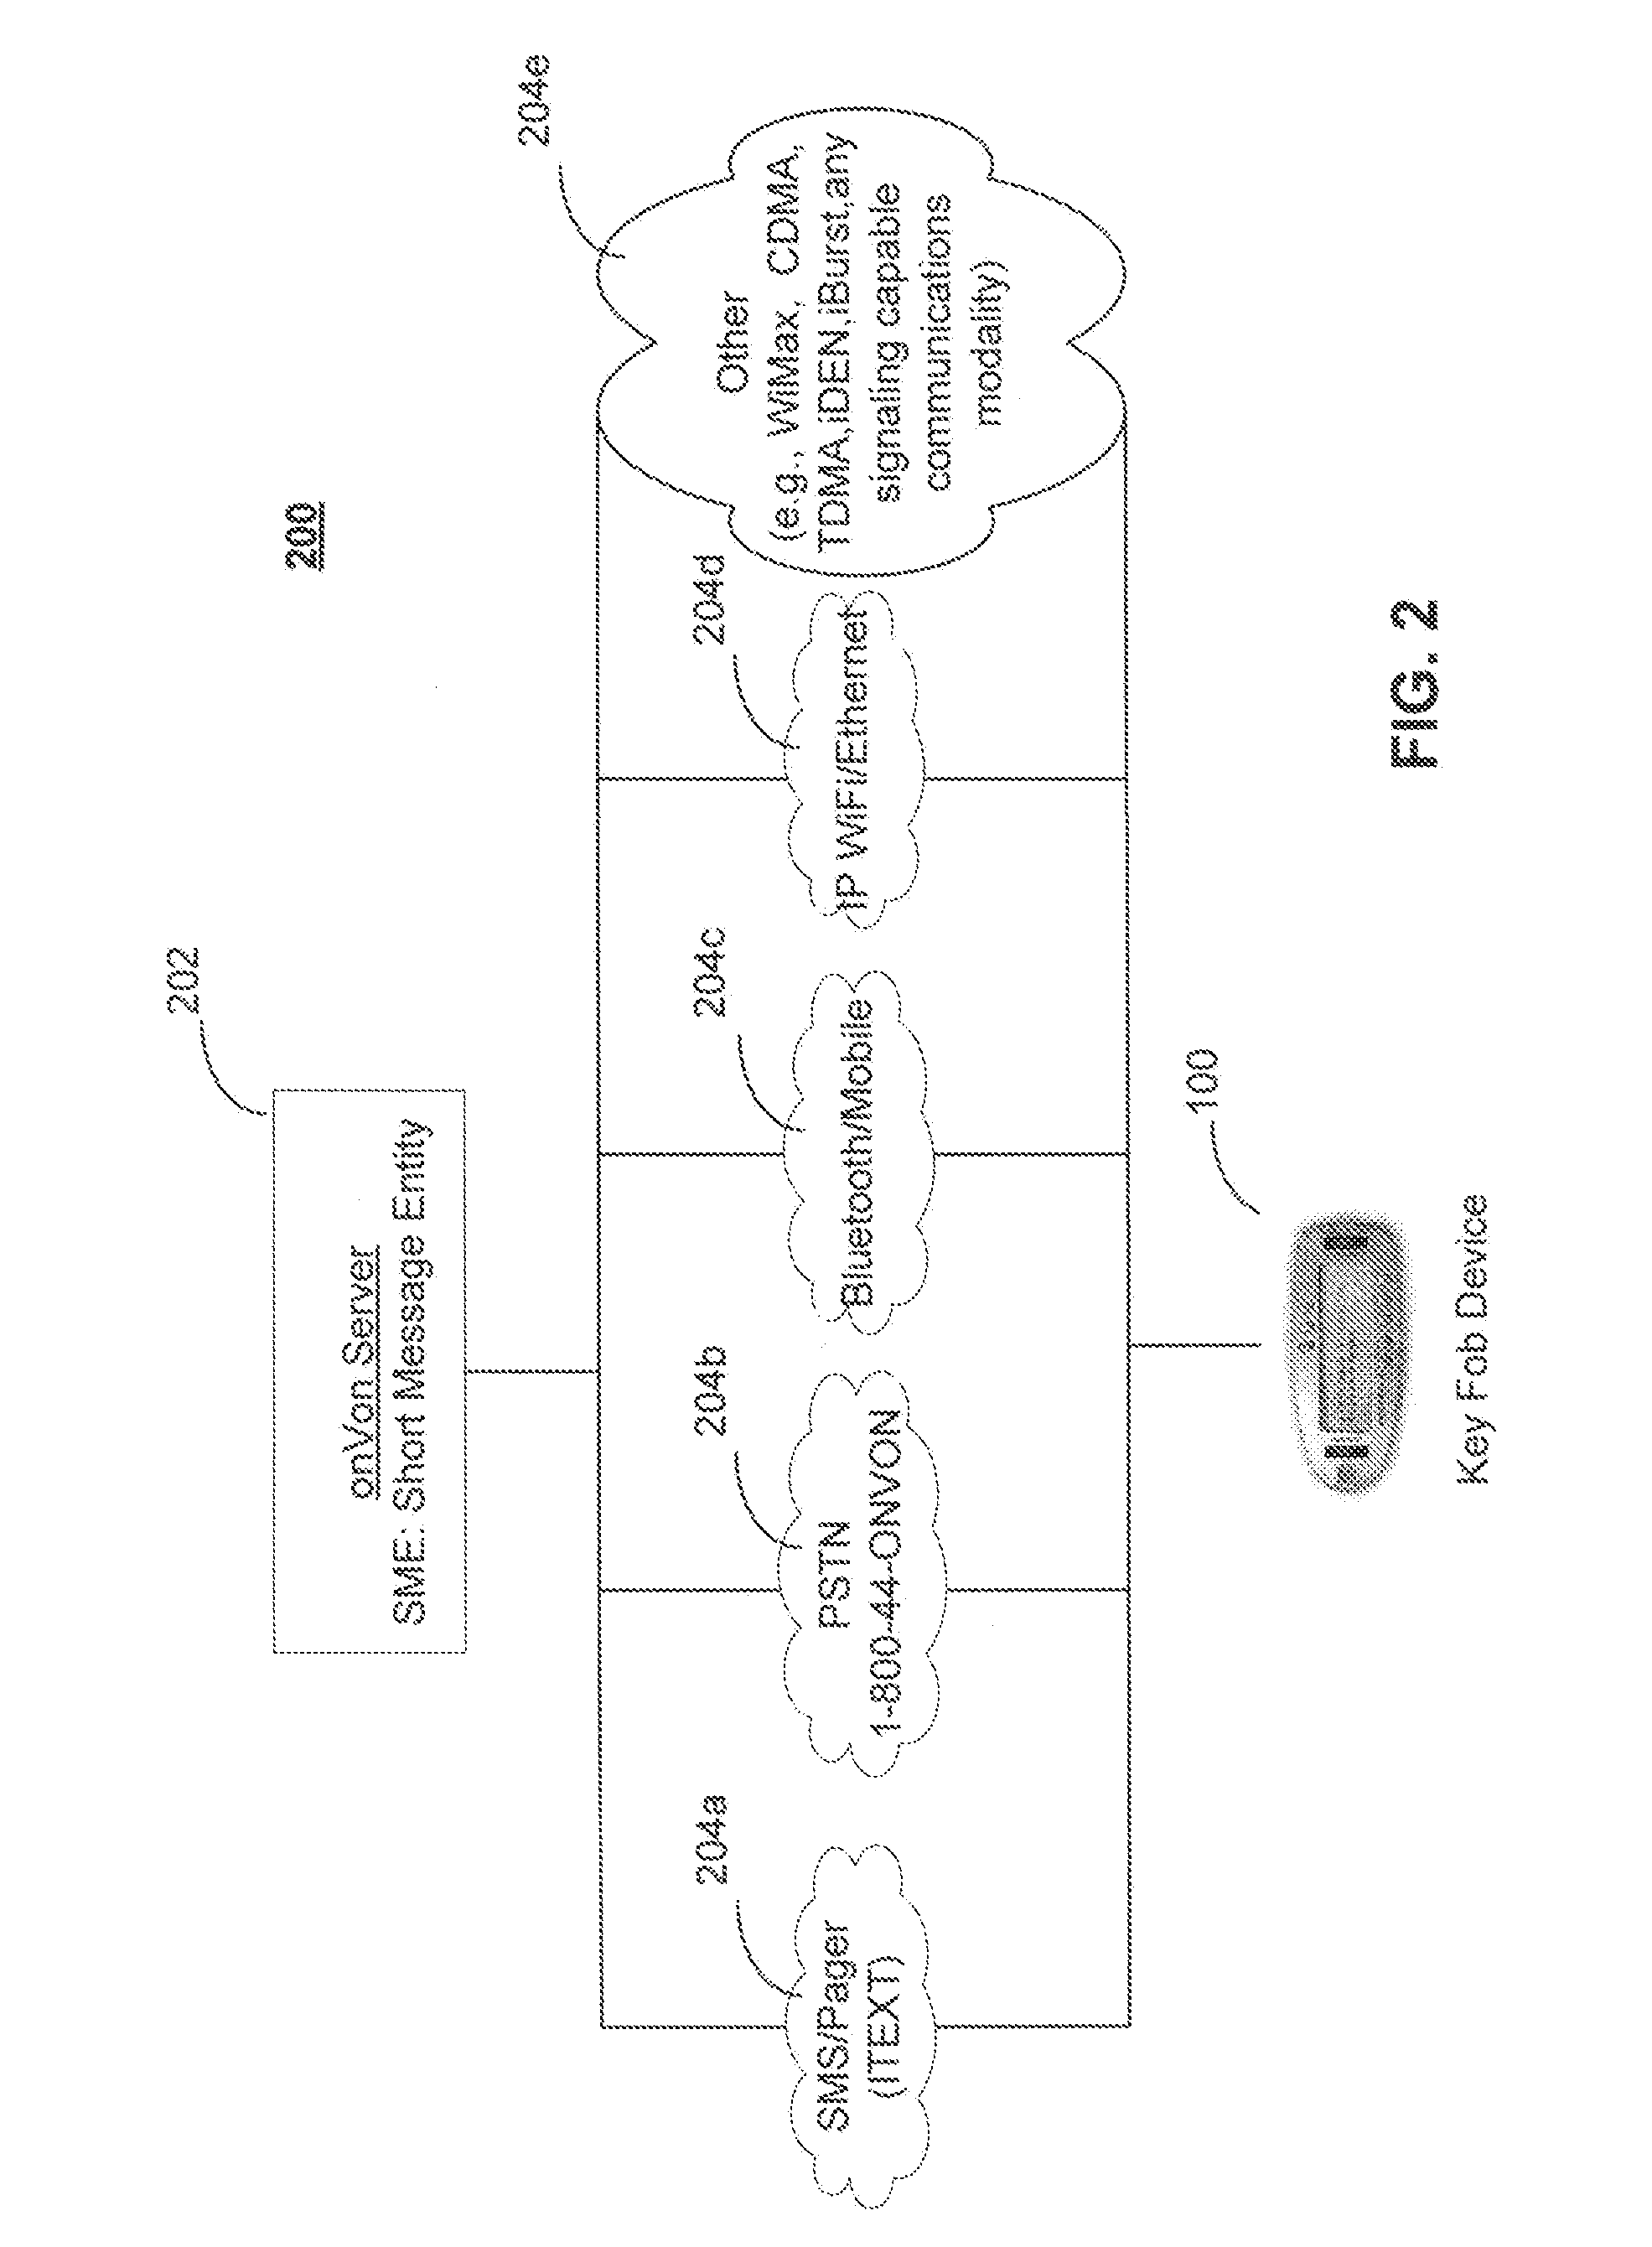 System, Method and Portable Communication Device